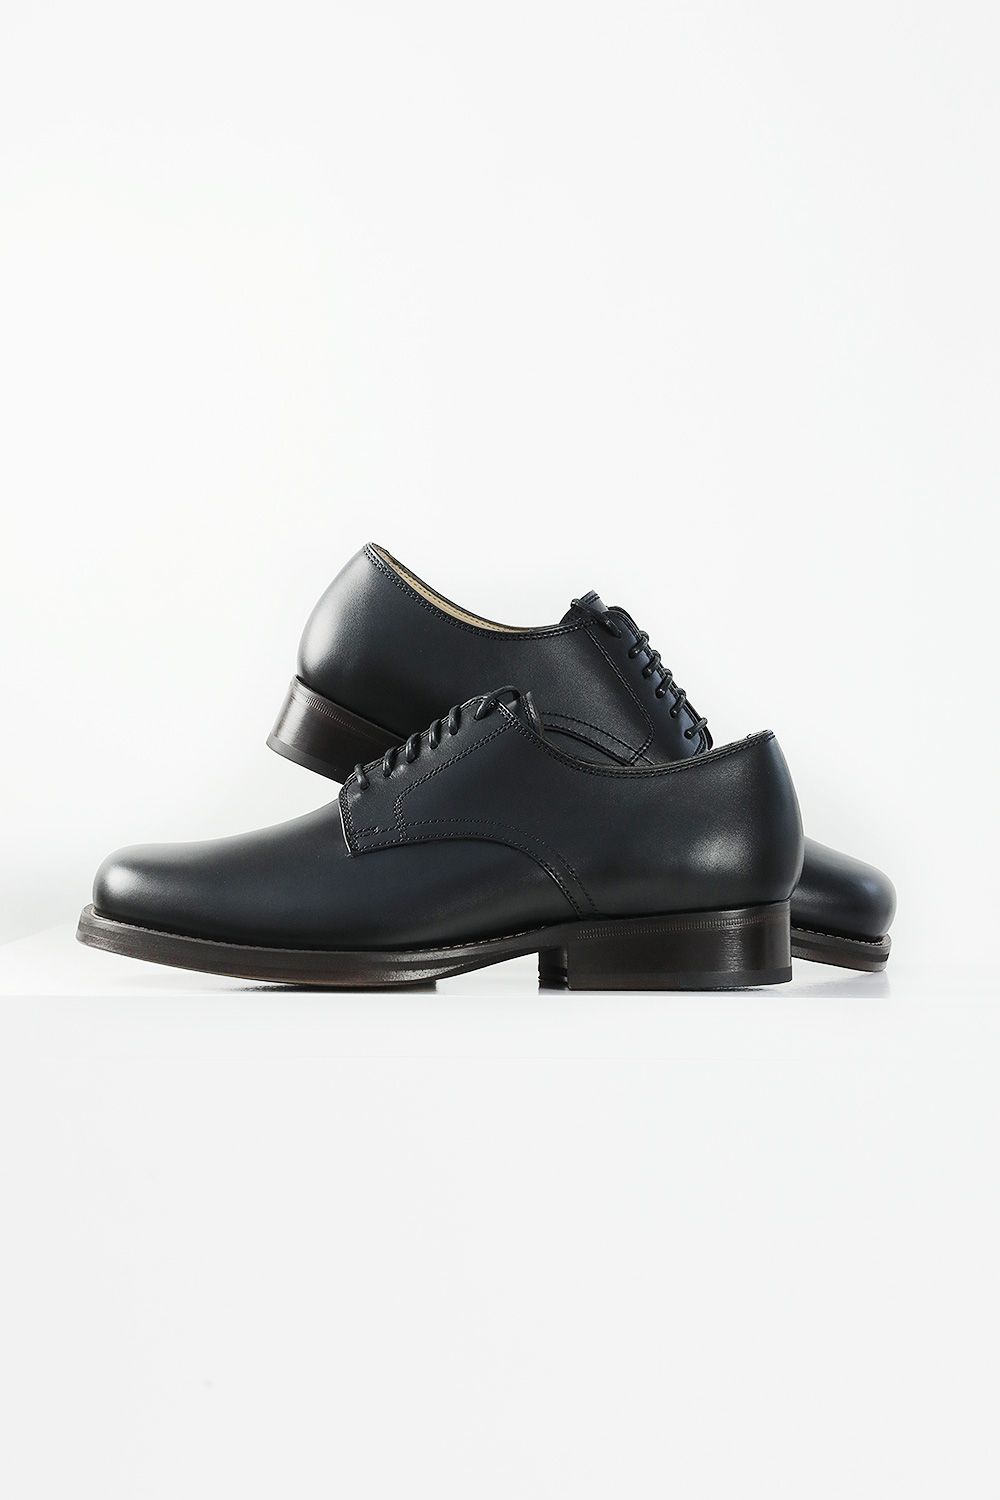 LEMAIRE ルメール HEELED DERBIES パンプス-silversky-lifesciences.com